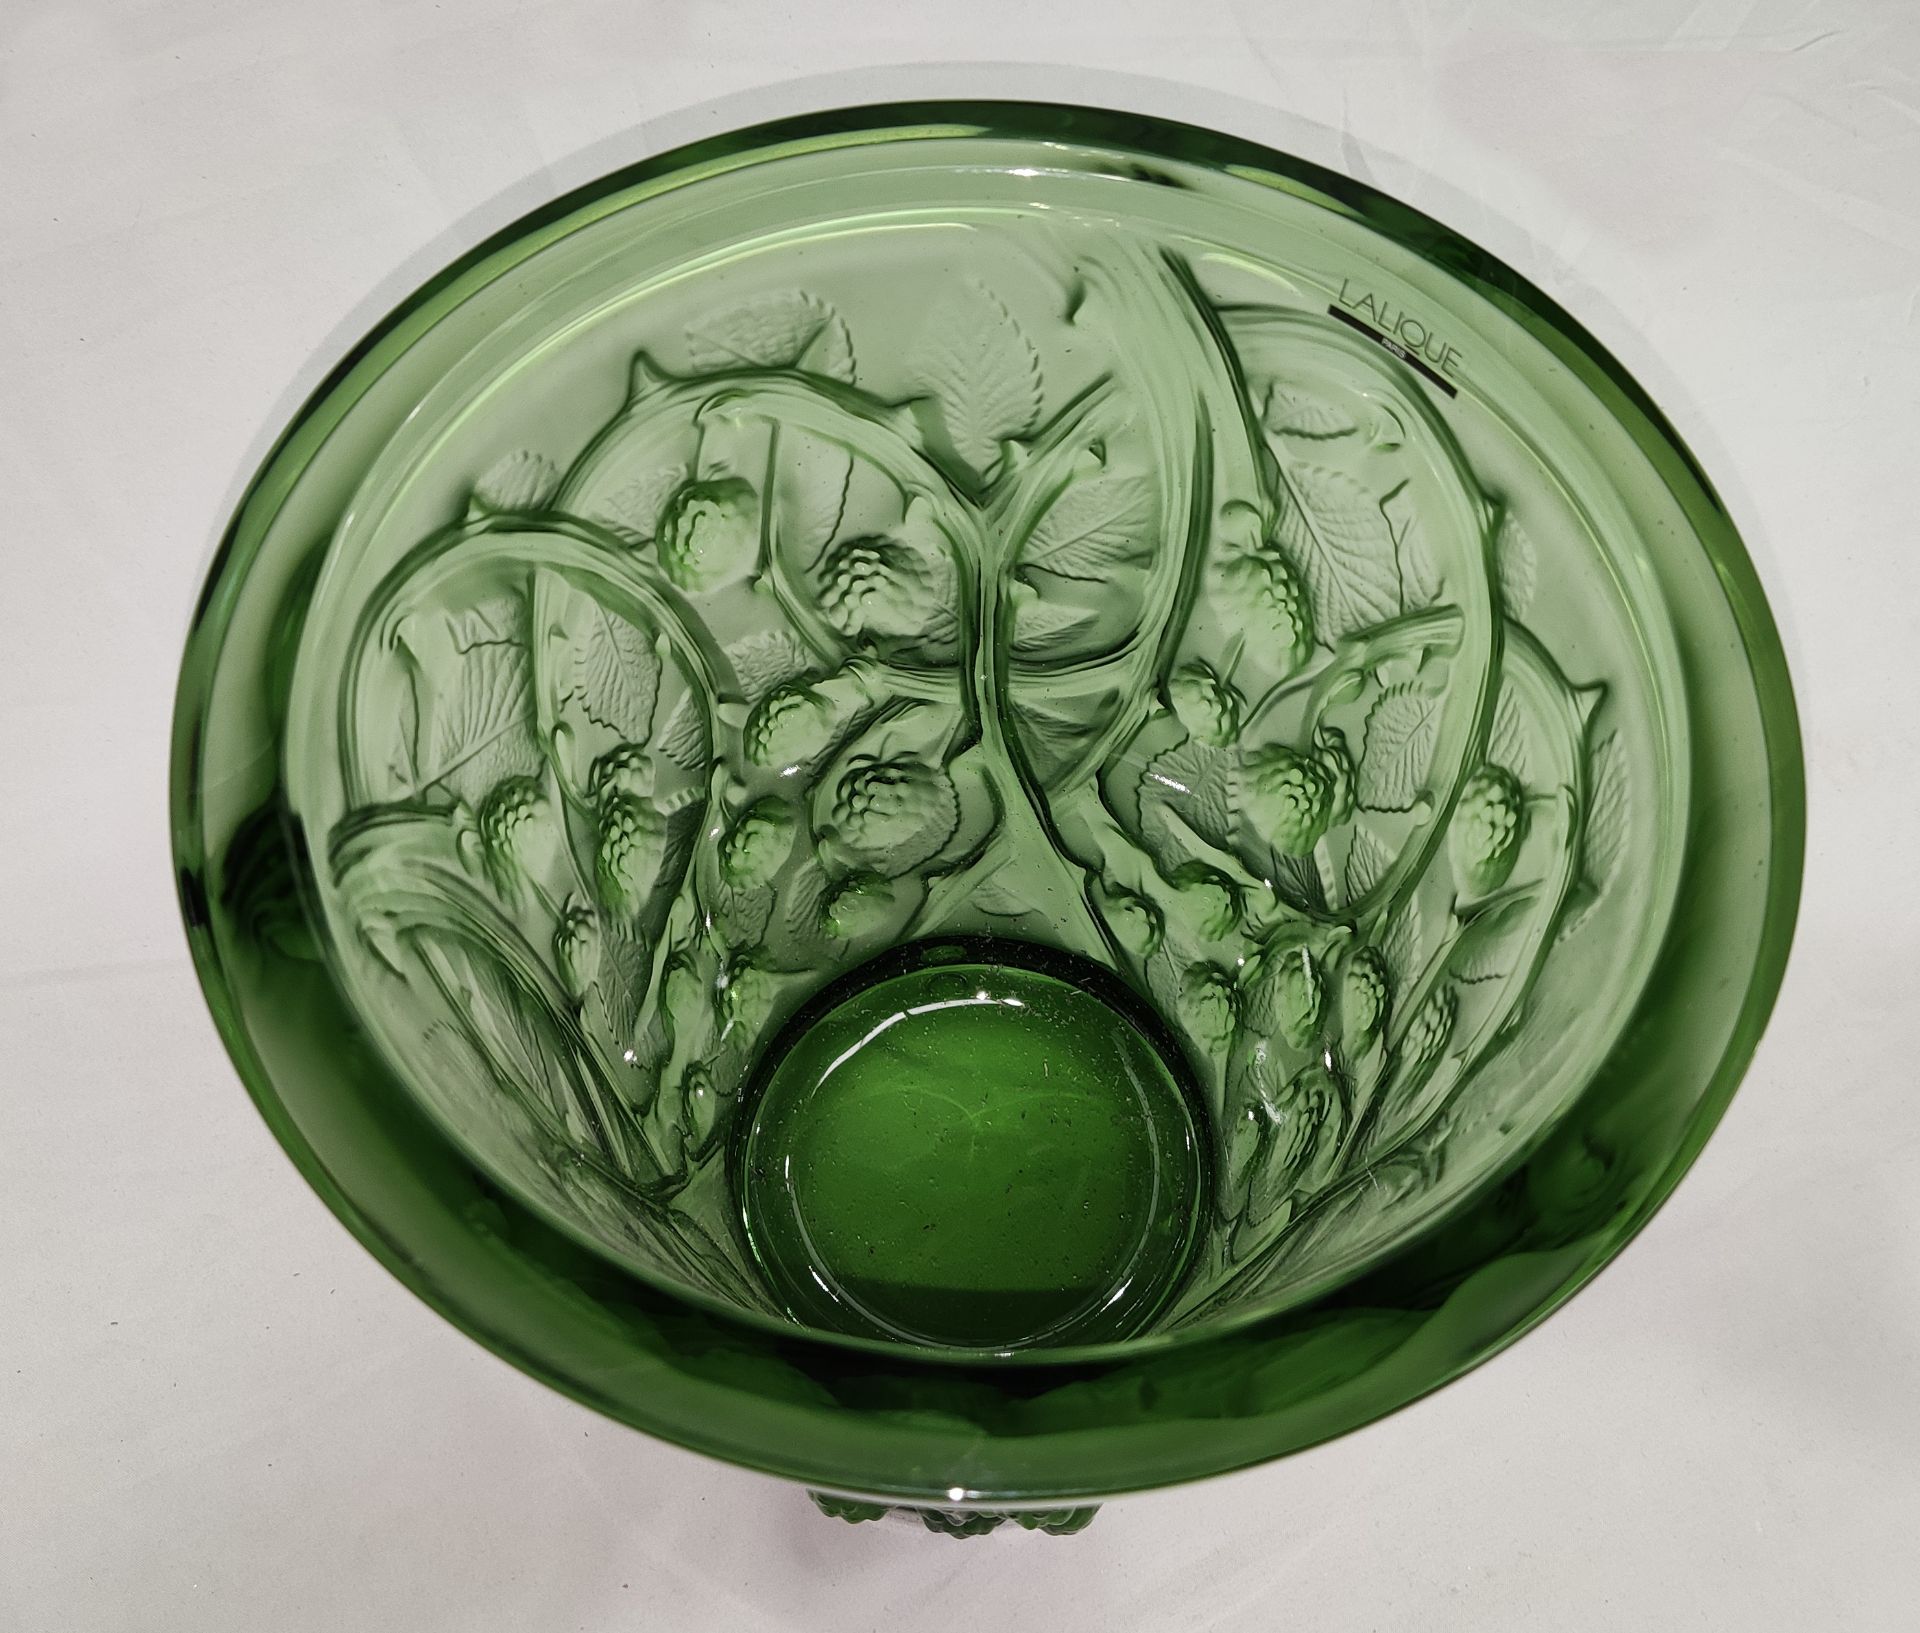 1 x LALIQUE 'Mures' Exquisite Handcrafted French Green Crystal Medium Vase - Original RRP £2,690 - Image 13 of 23